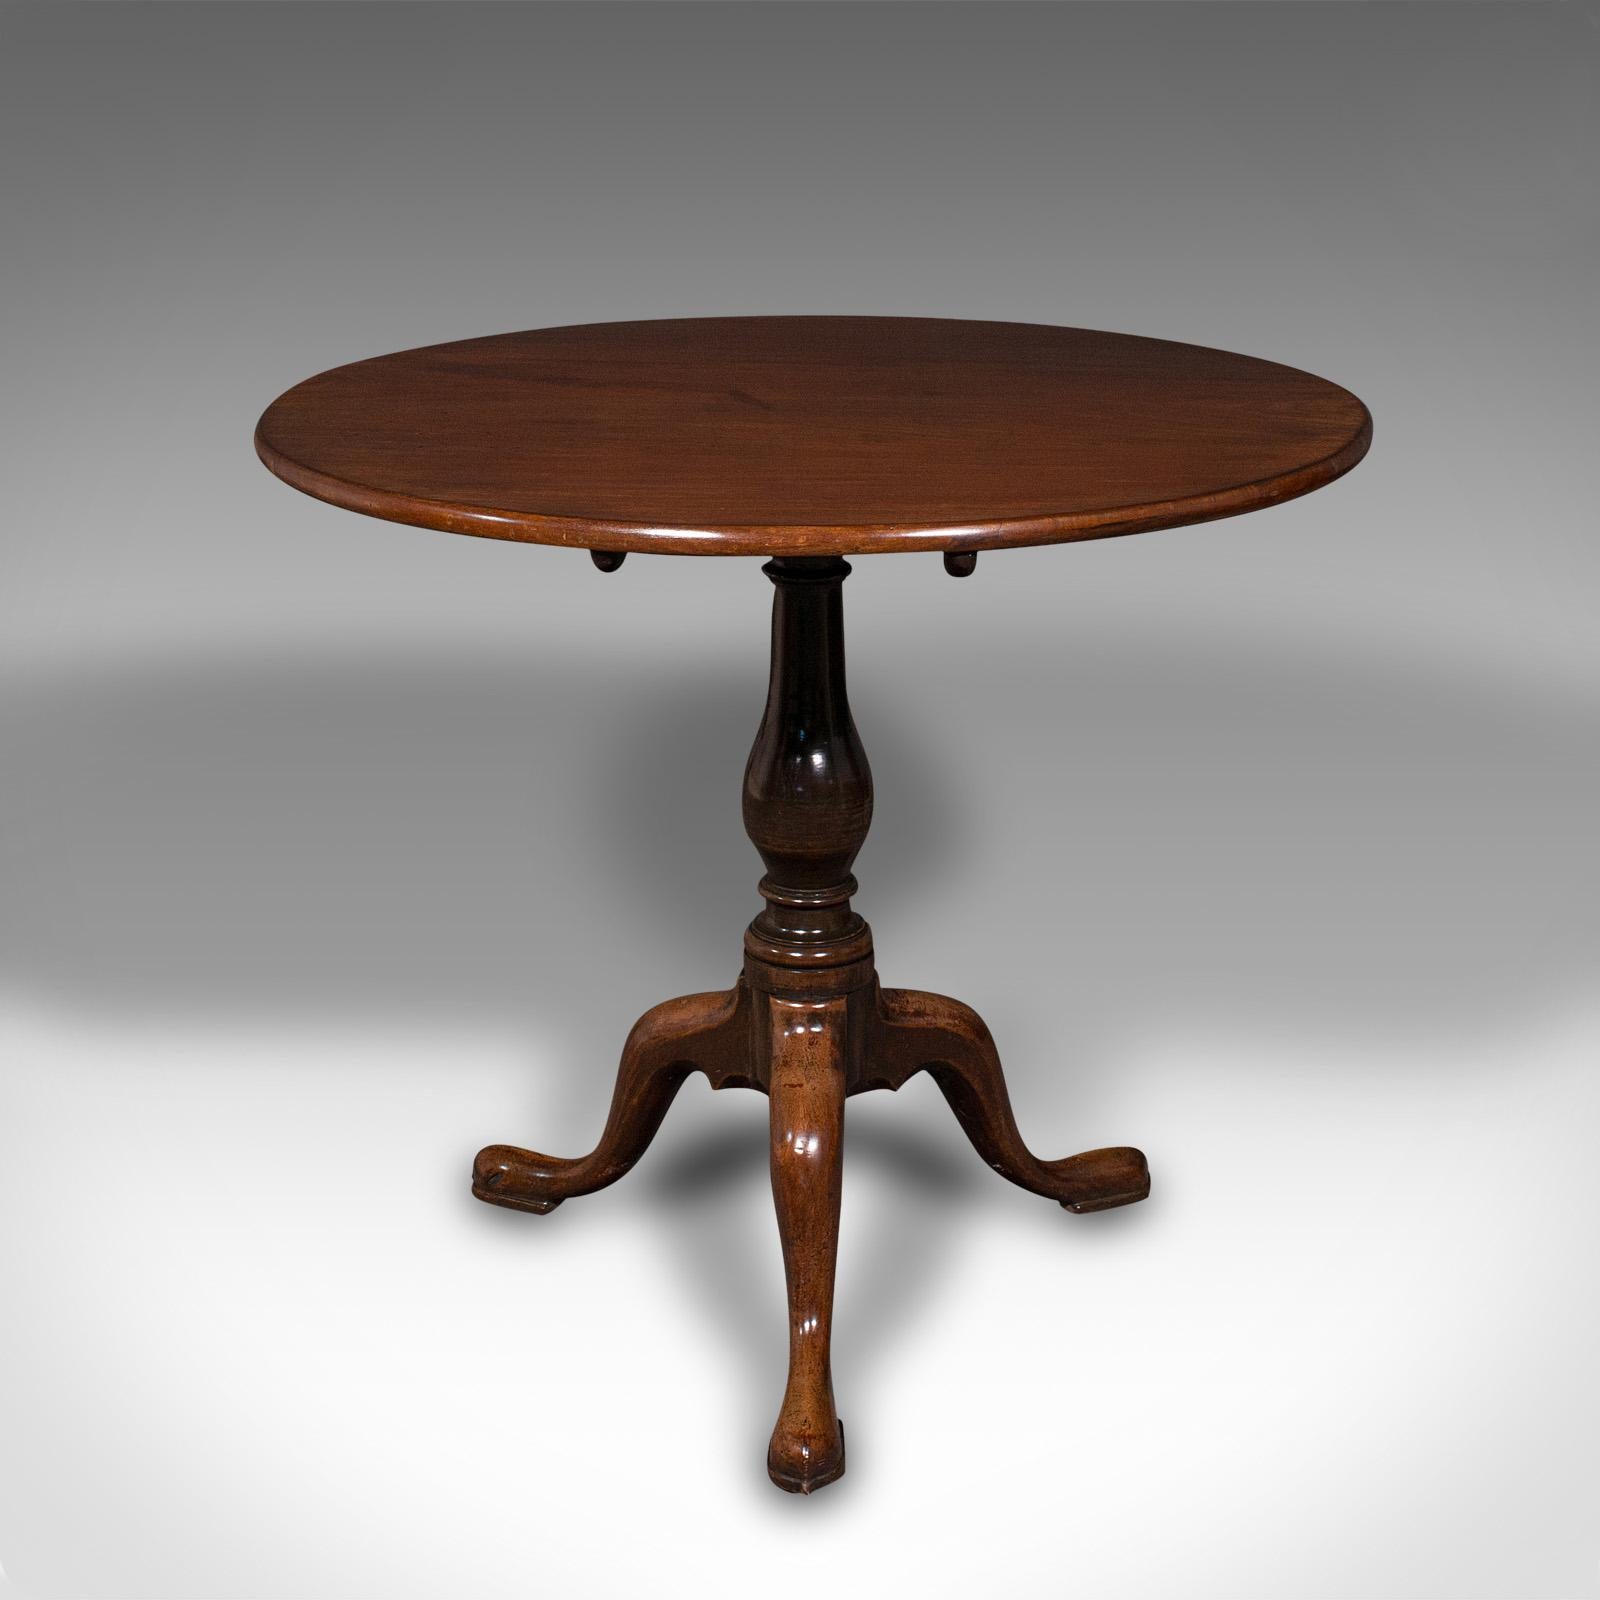 Antique Tilt Top Table, English, Side, Lamp, Breakfast, Georgian, Circa 1820 In Good Condition For Sale In Hele, Devon, GB